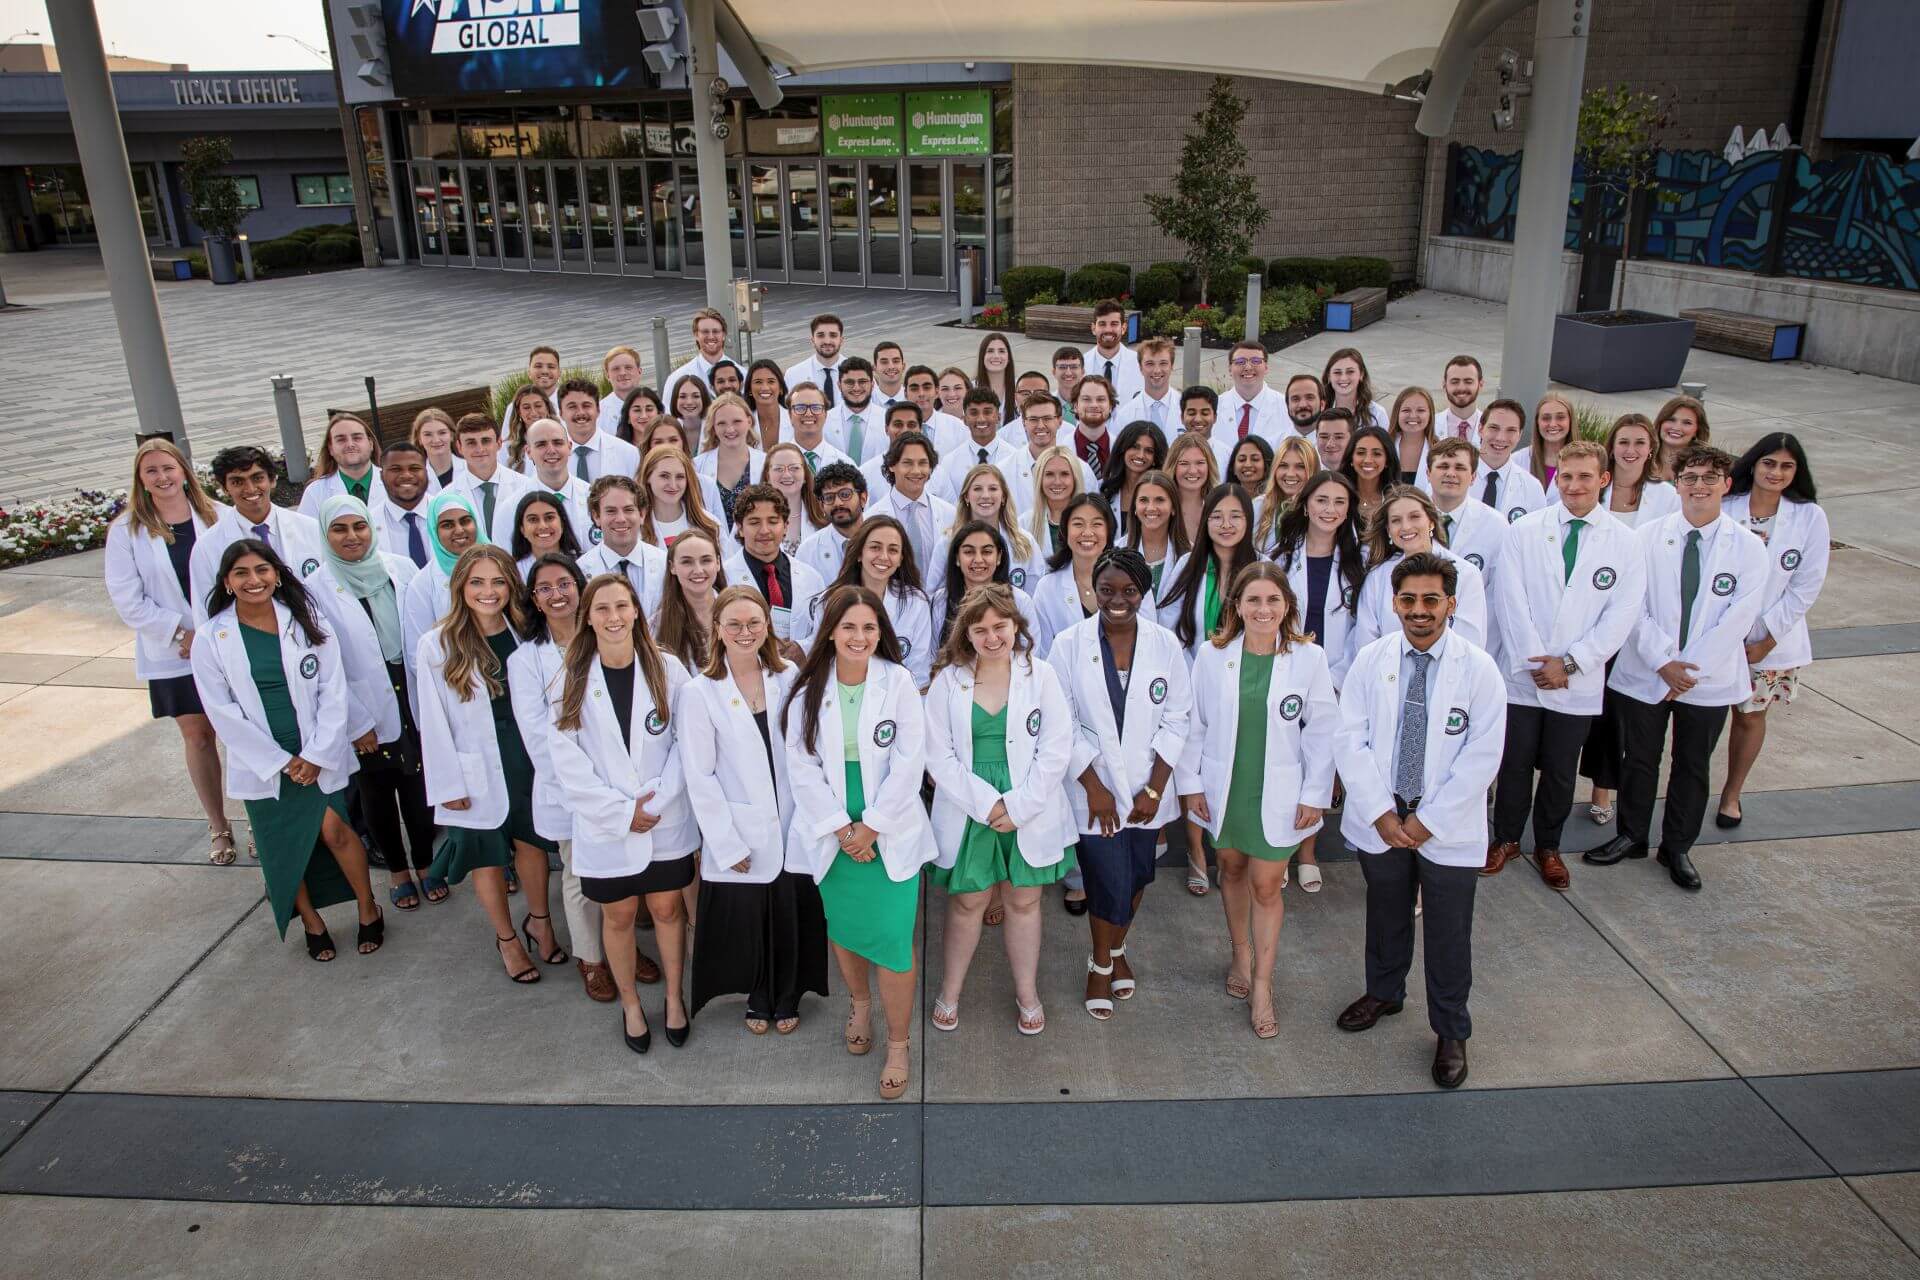 Marshall University Joan C. Edwards School of Medicine's Class of 2028 in their White Coats outside of the Marshall Health Network Arena in downtown Huntington.